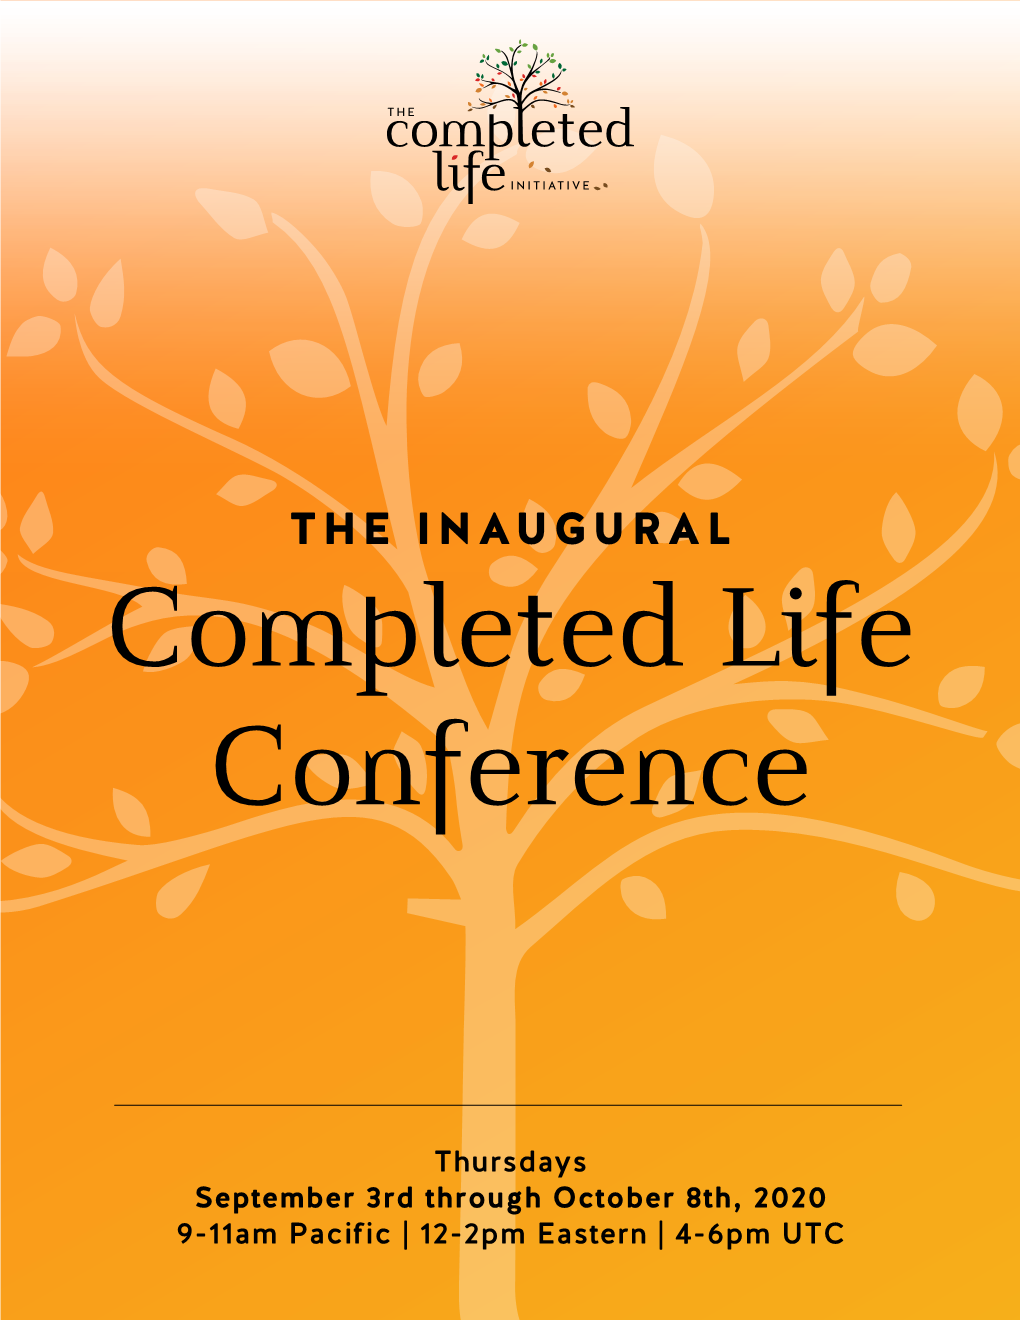 THE INAUGURAL Completed Life Conference